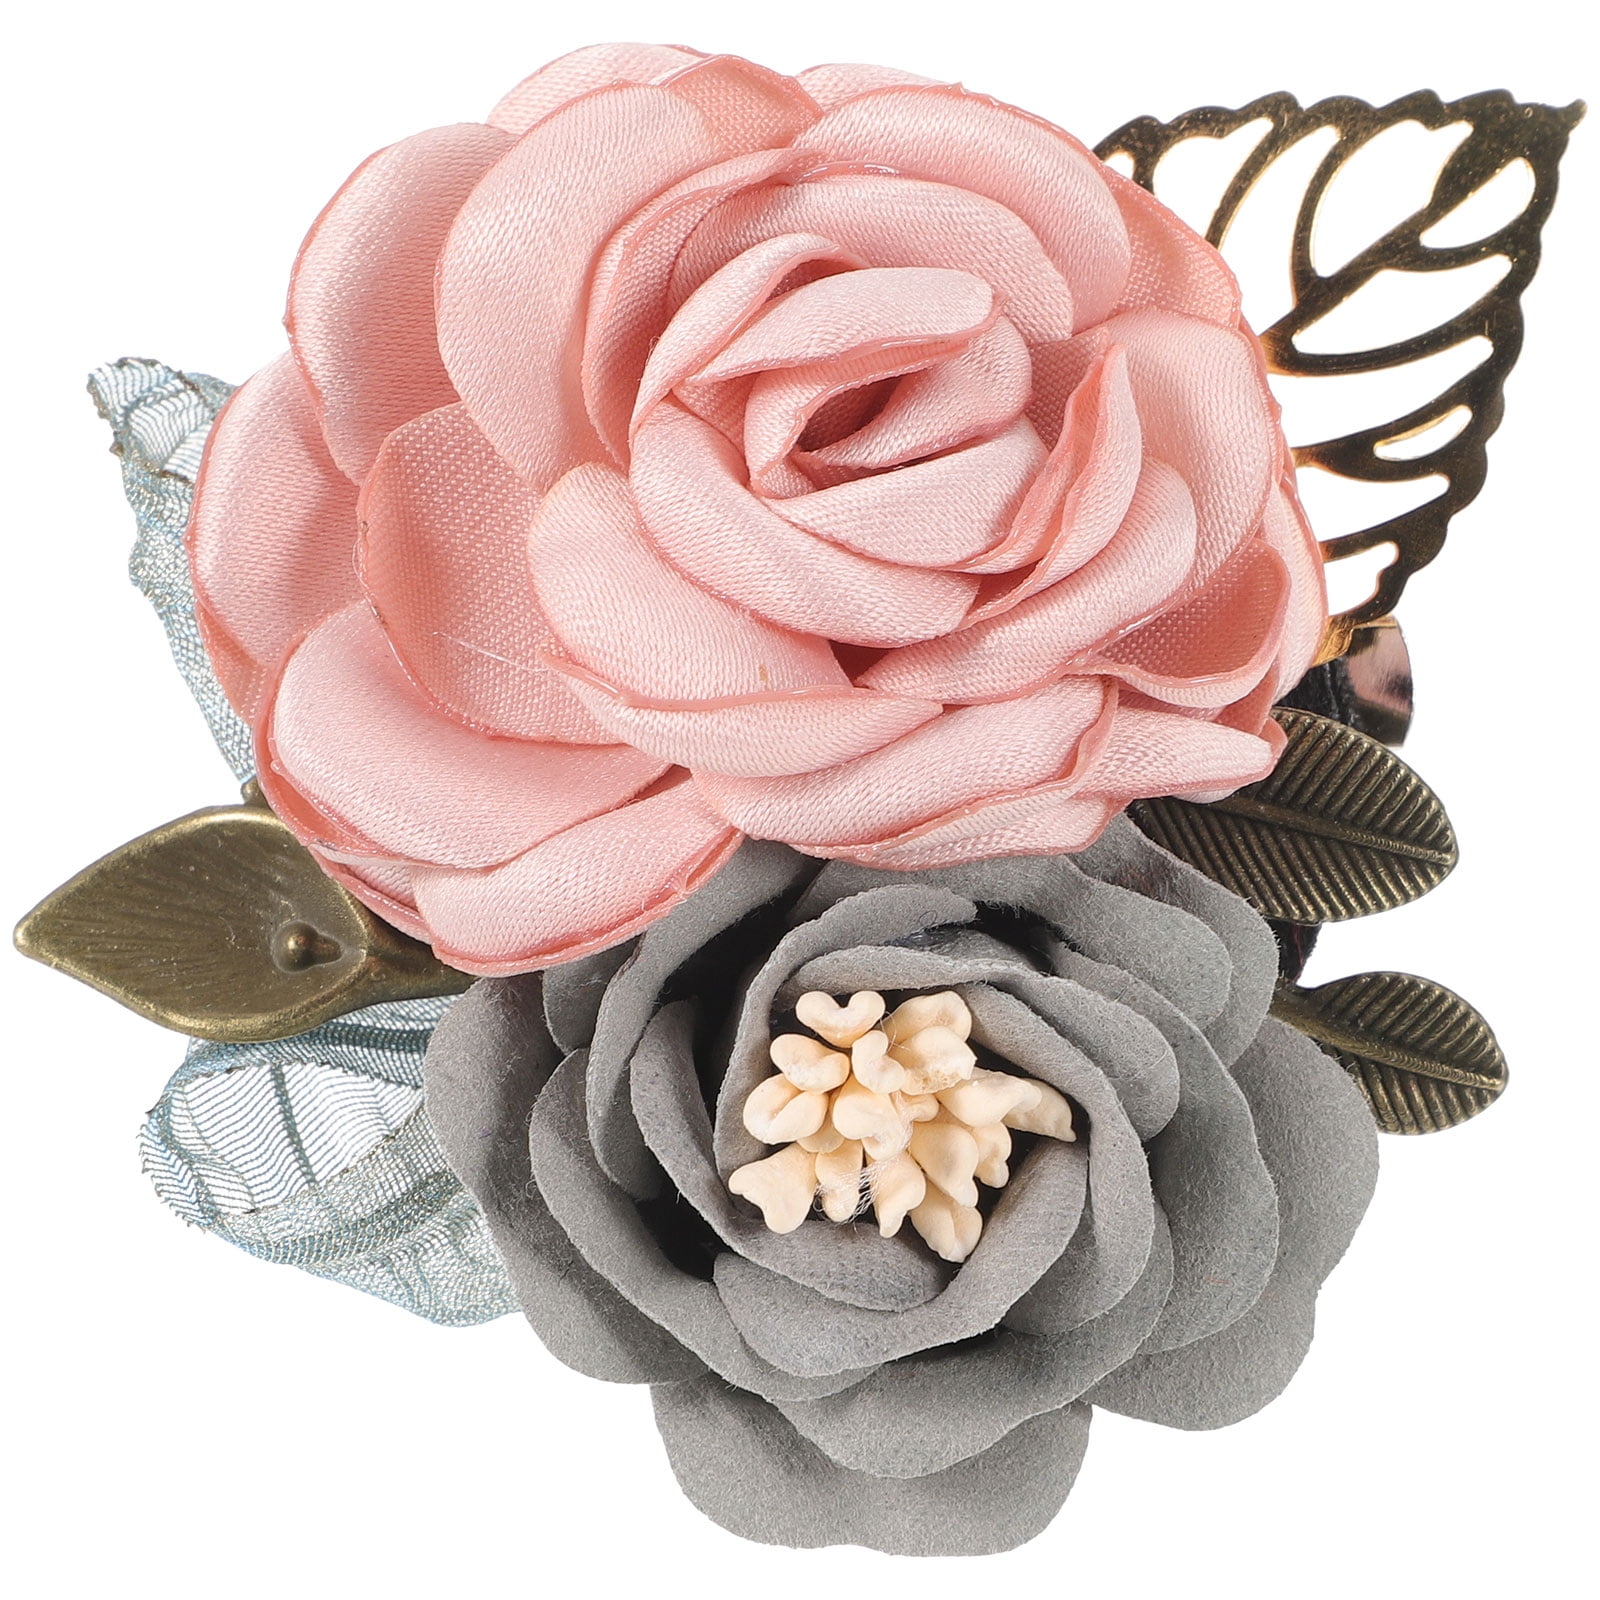  GANAZONO 20 Pairs Corsage Magnetic Buckle Boutonniere Brooch  pin Magnet Flower Floral Corsage Magnets boutonnieres Bouquet Magnets  boutineer The Flowers Florist Supplies Plastic Bride : Home & Kitchen